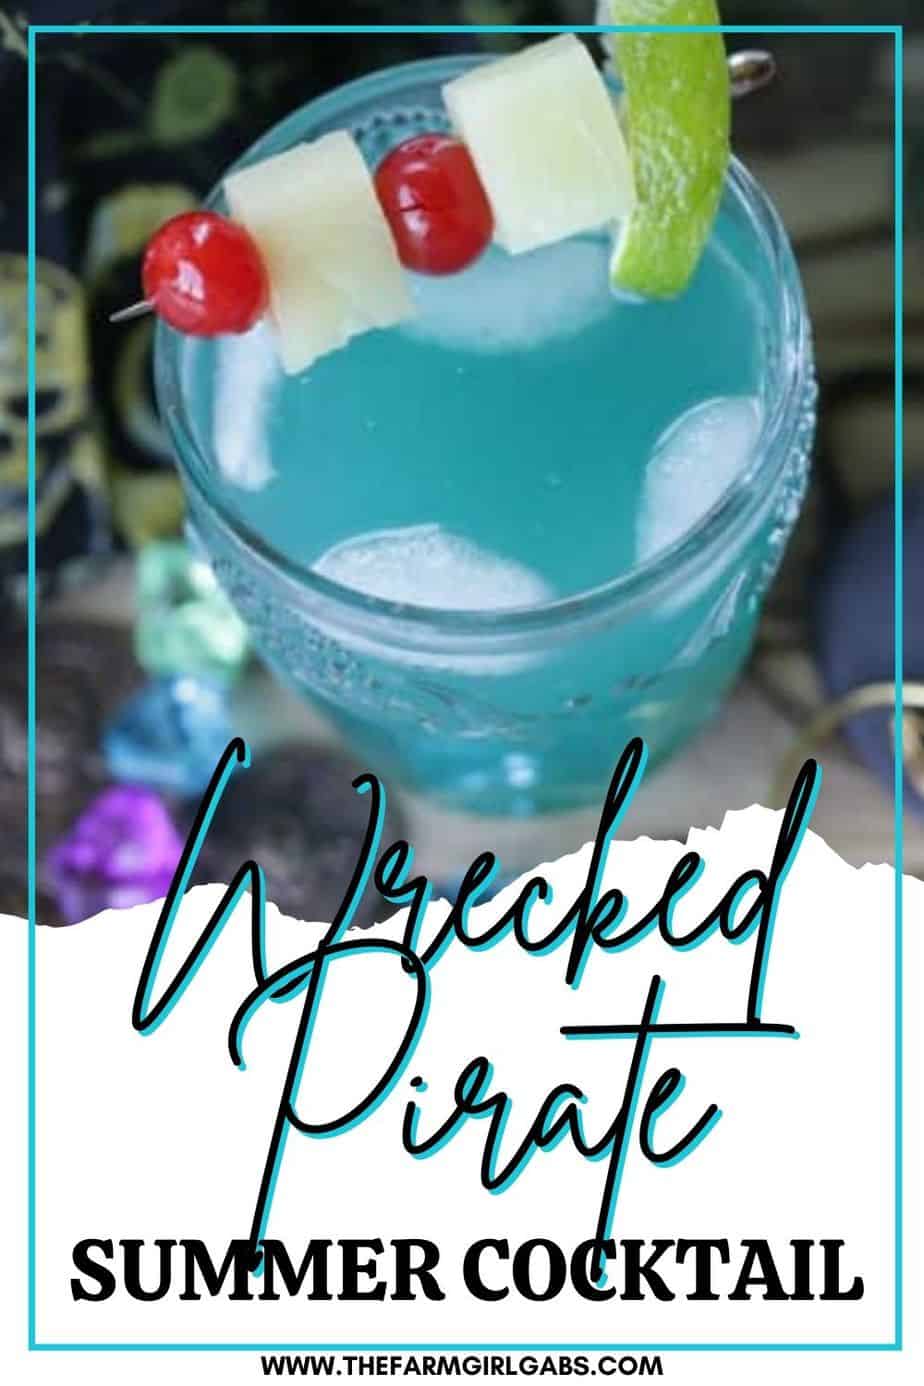 The Wrecked Pirate Cocktail - The Farm Girl Gabs®